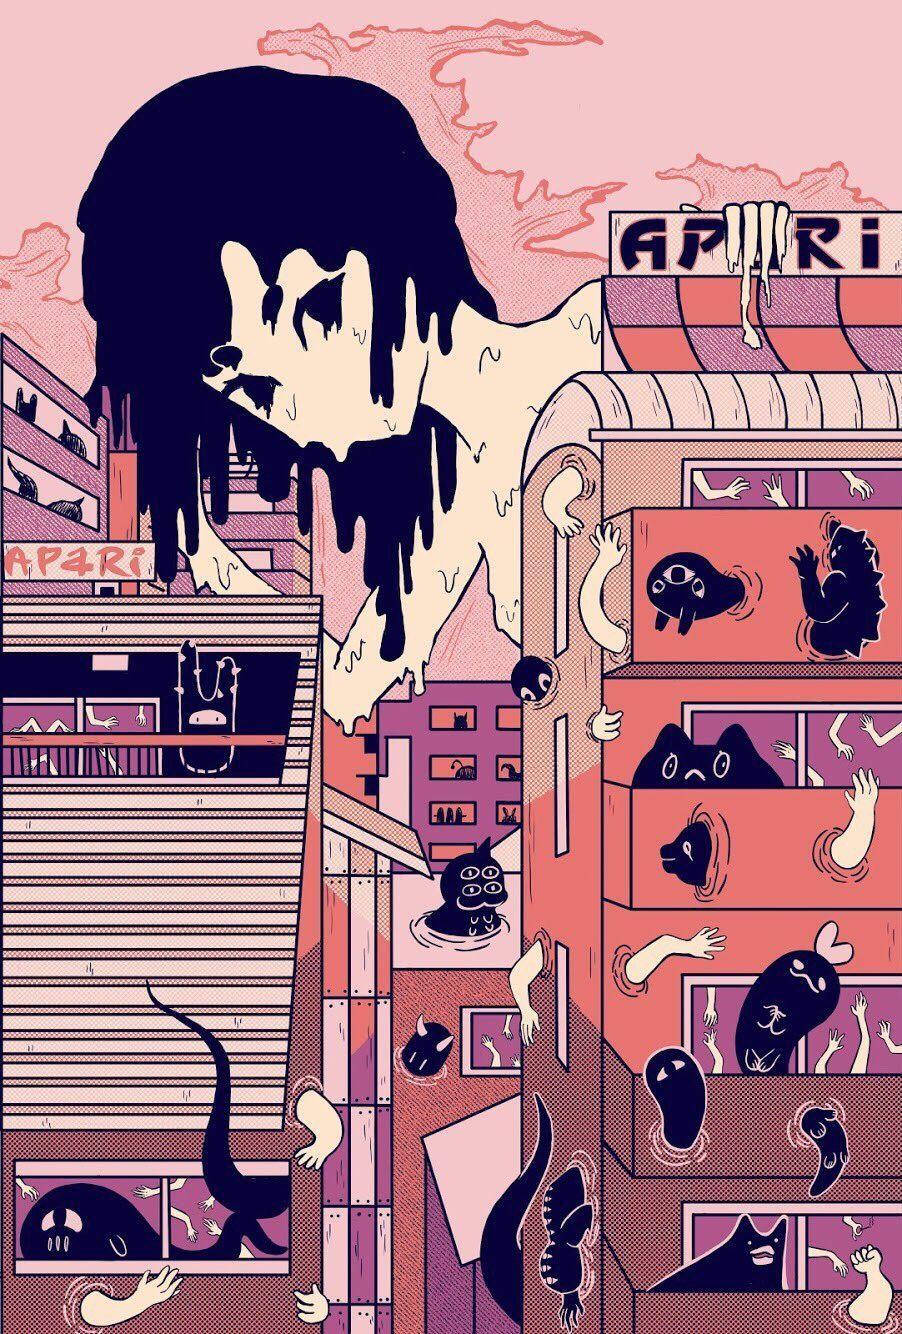 Aesthetic Anime Giant Girl And Ghost Building Phone Background